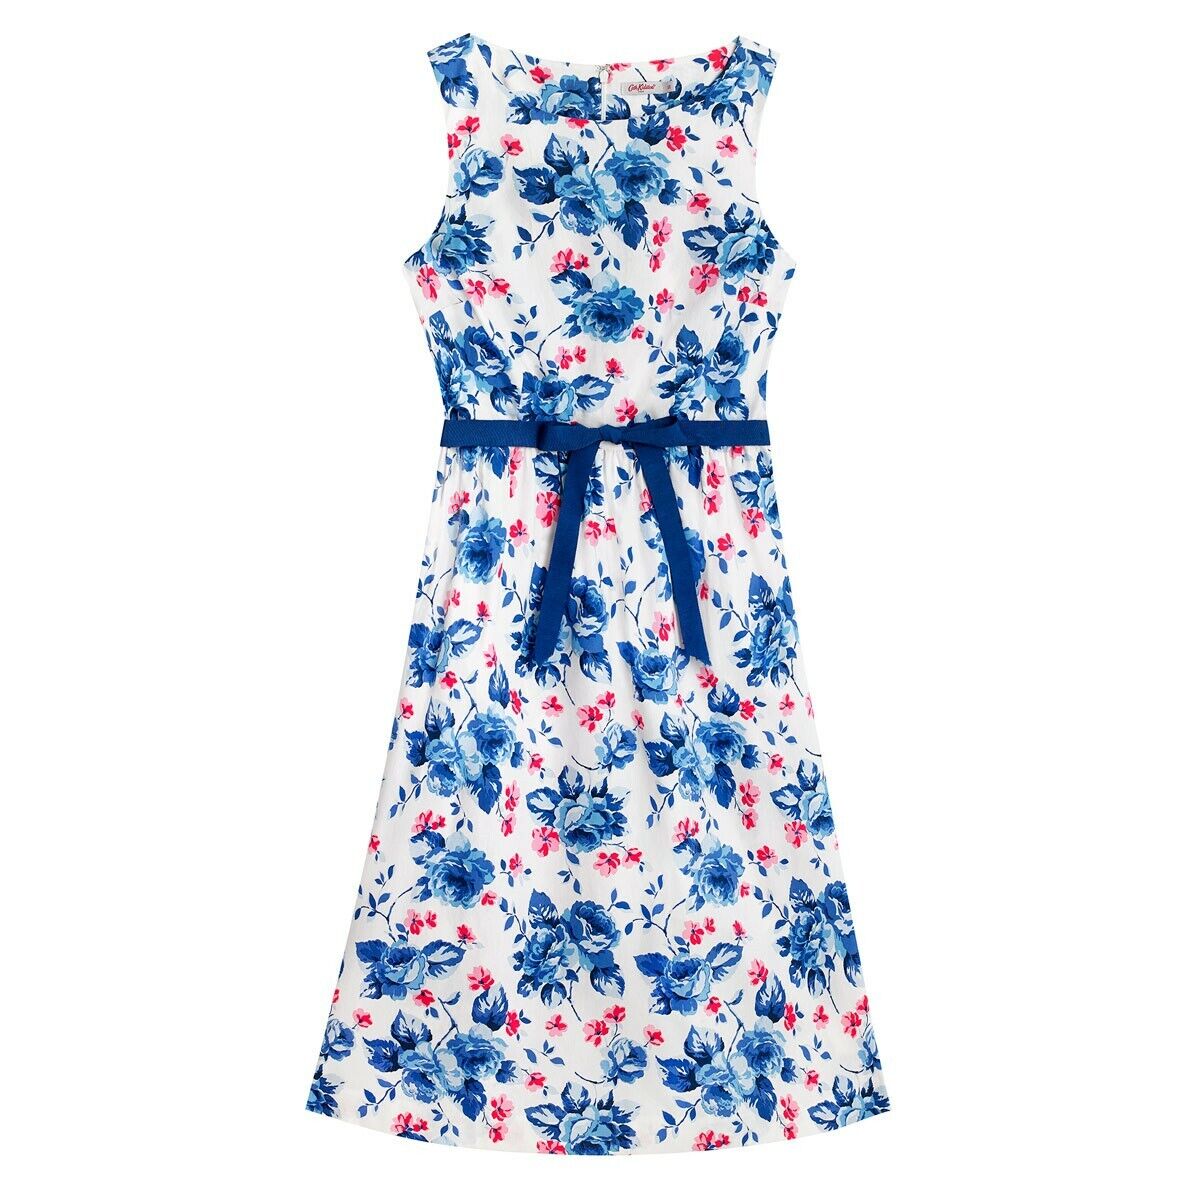 Cath Kidston Floral Dress 18~Dulwich Cabbage Rose Sleeveless Cotton Dress~BNWT